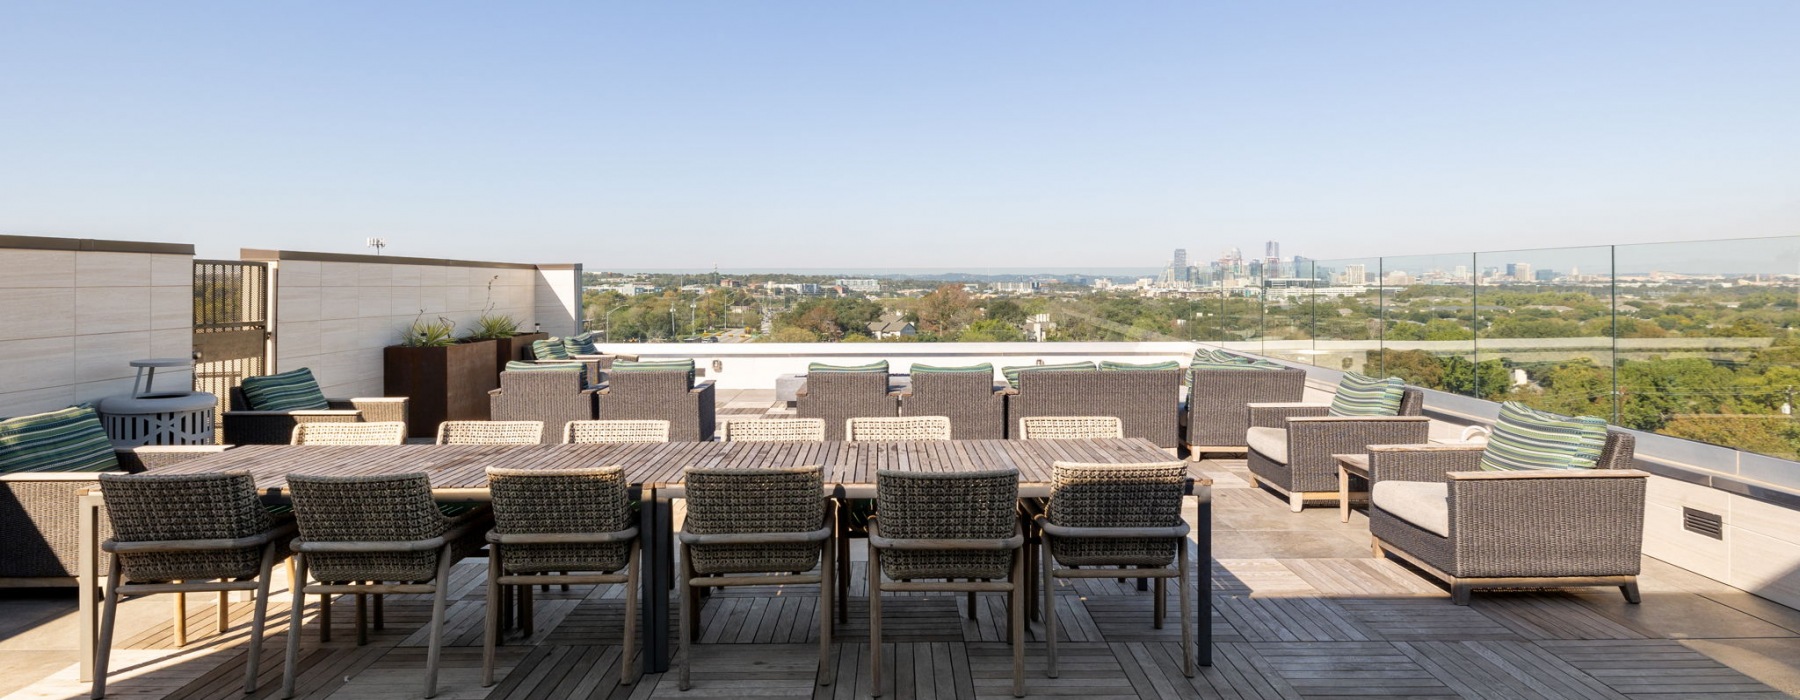 Rooftop lounge with downtown austin views